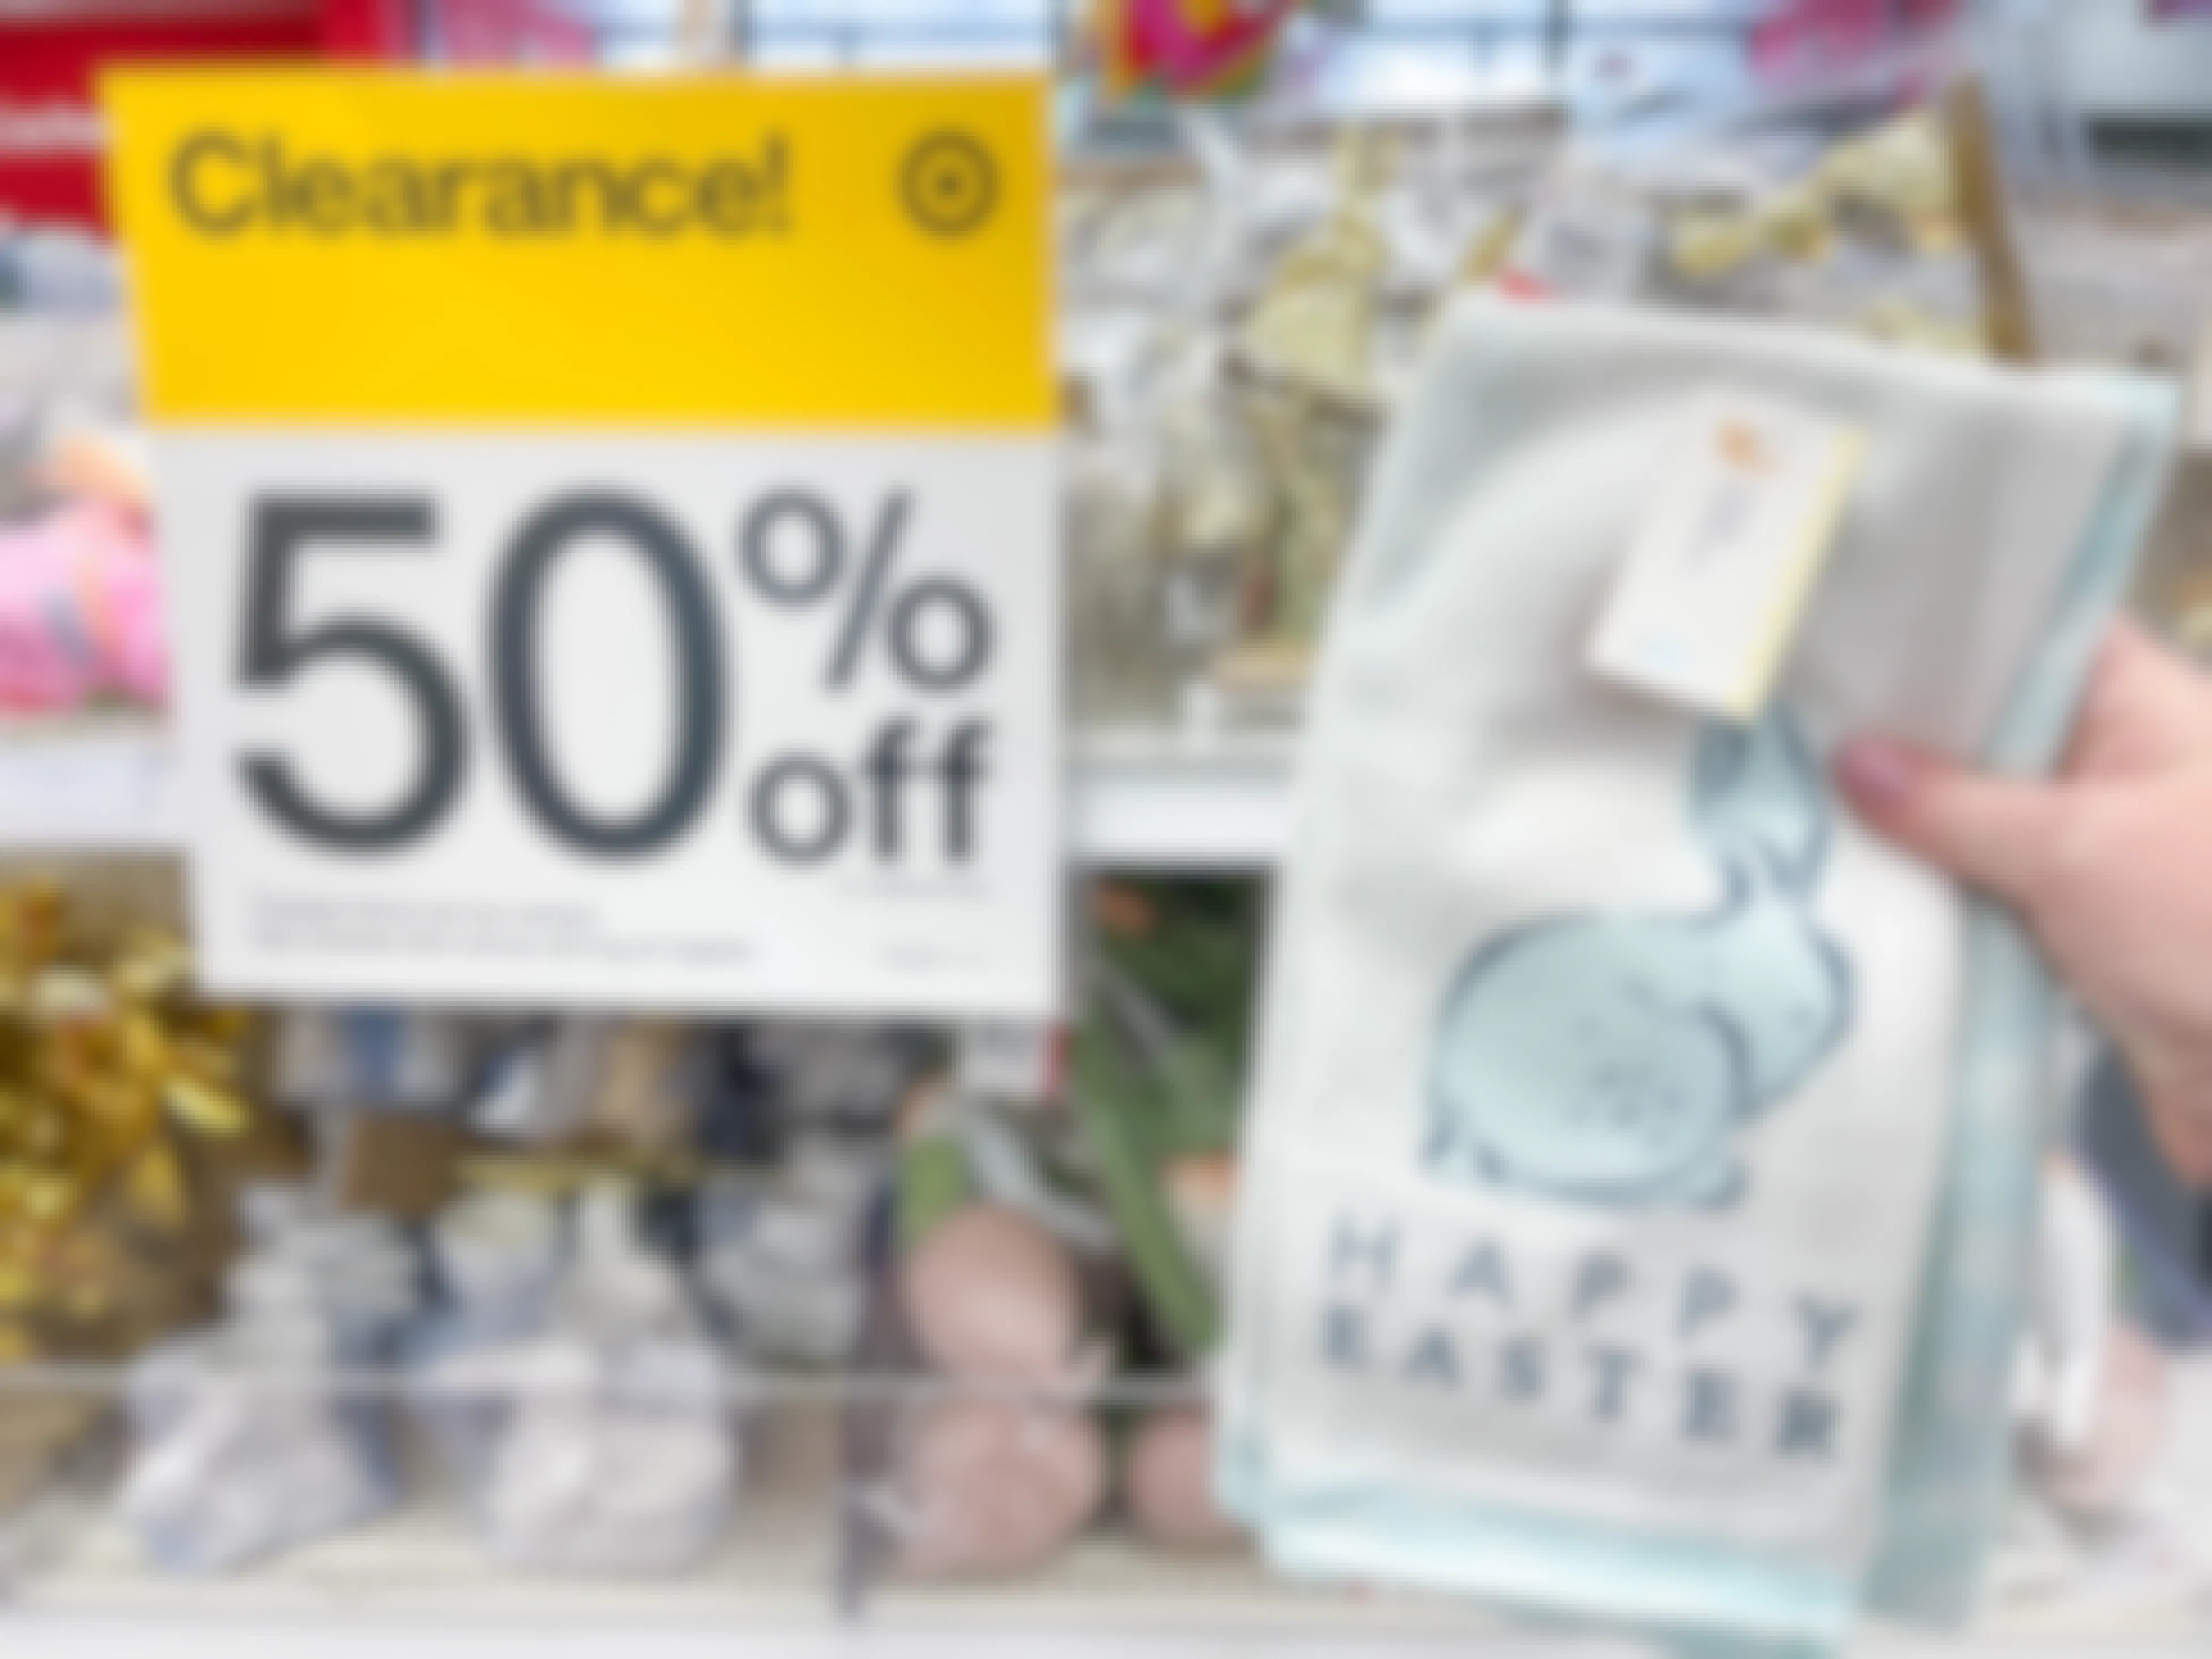 a happy easter hand towel being held in front of clearance 50% off sale sign in target